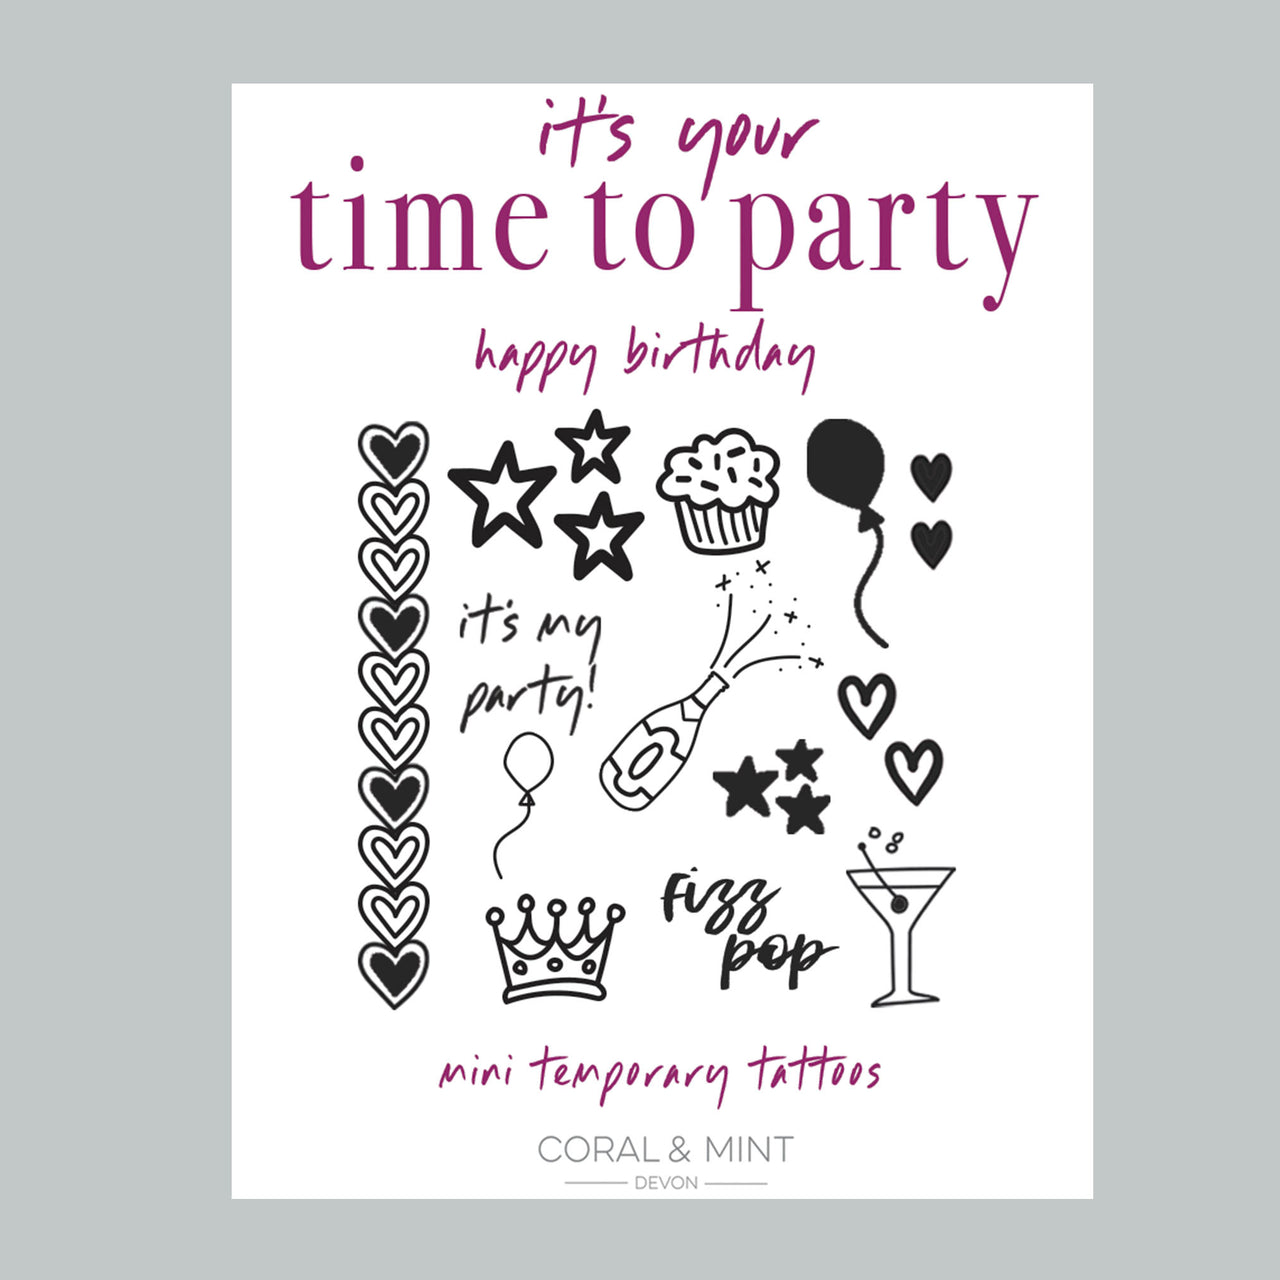 Time to party Tattoos